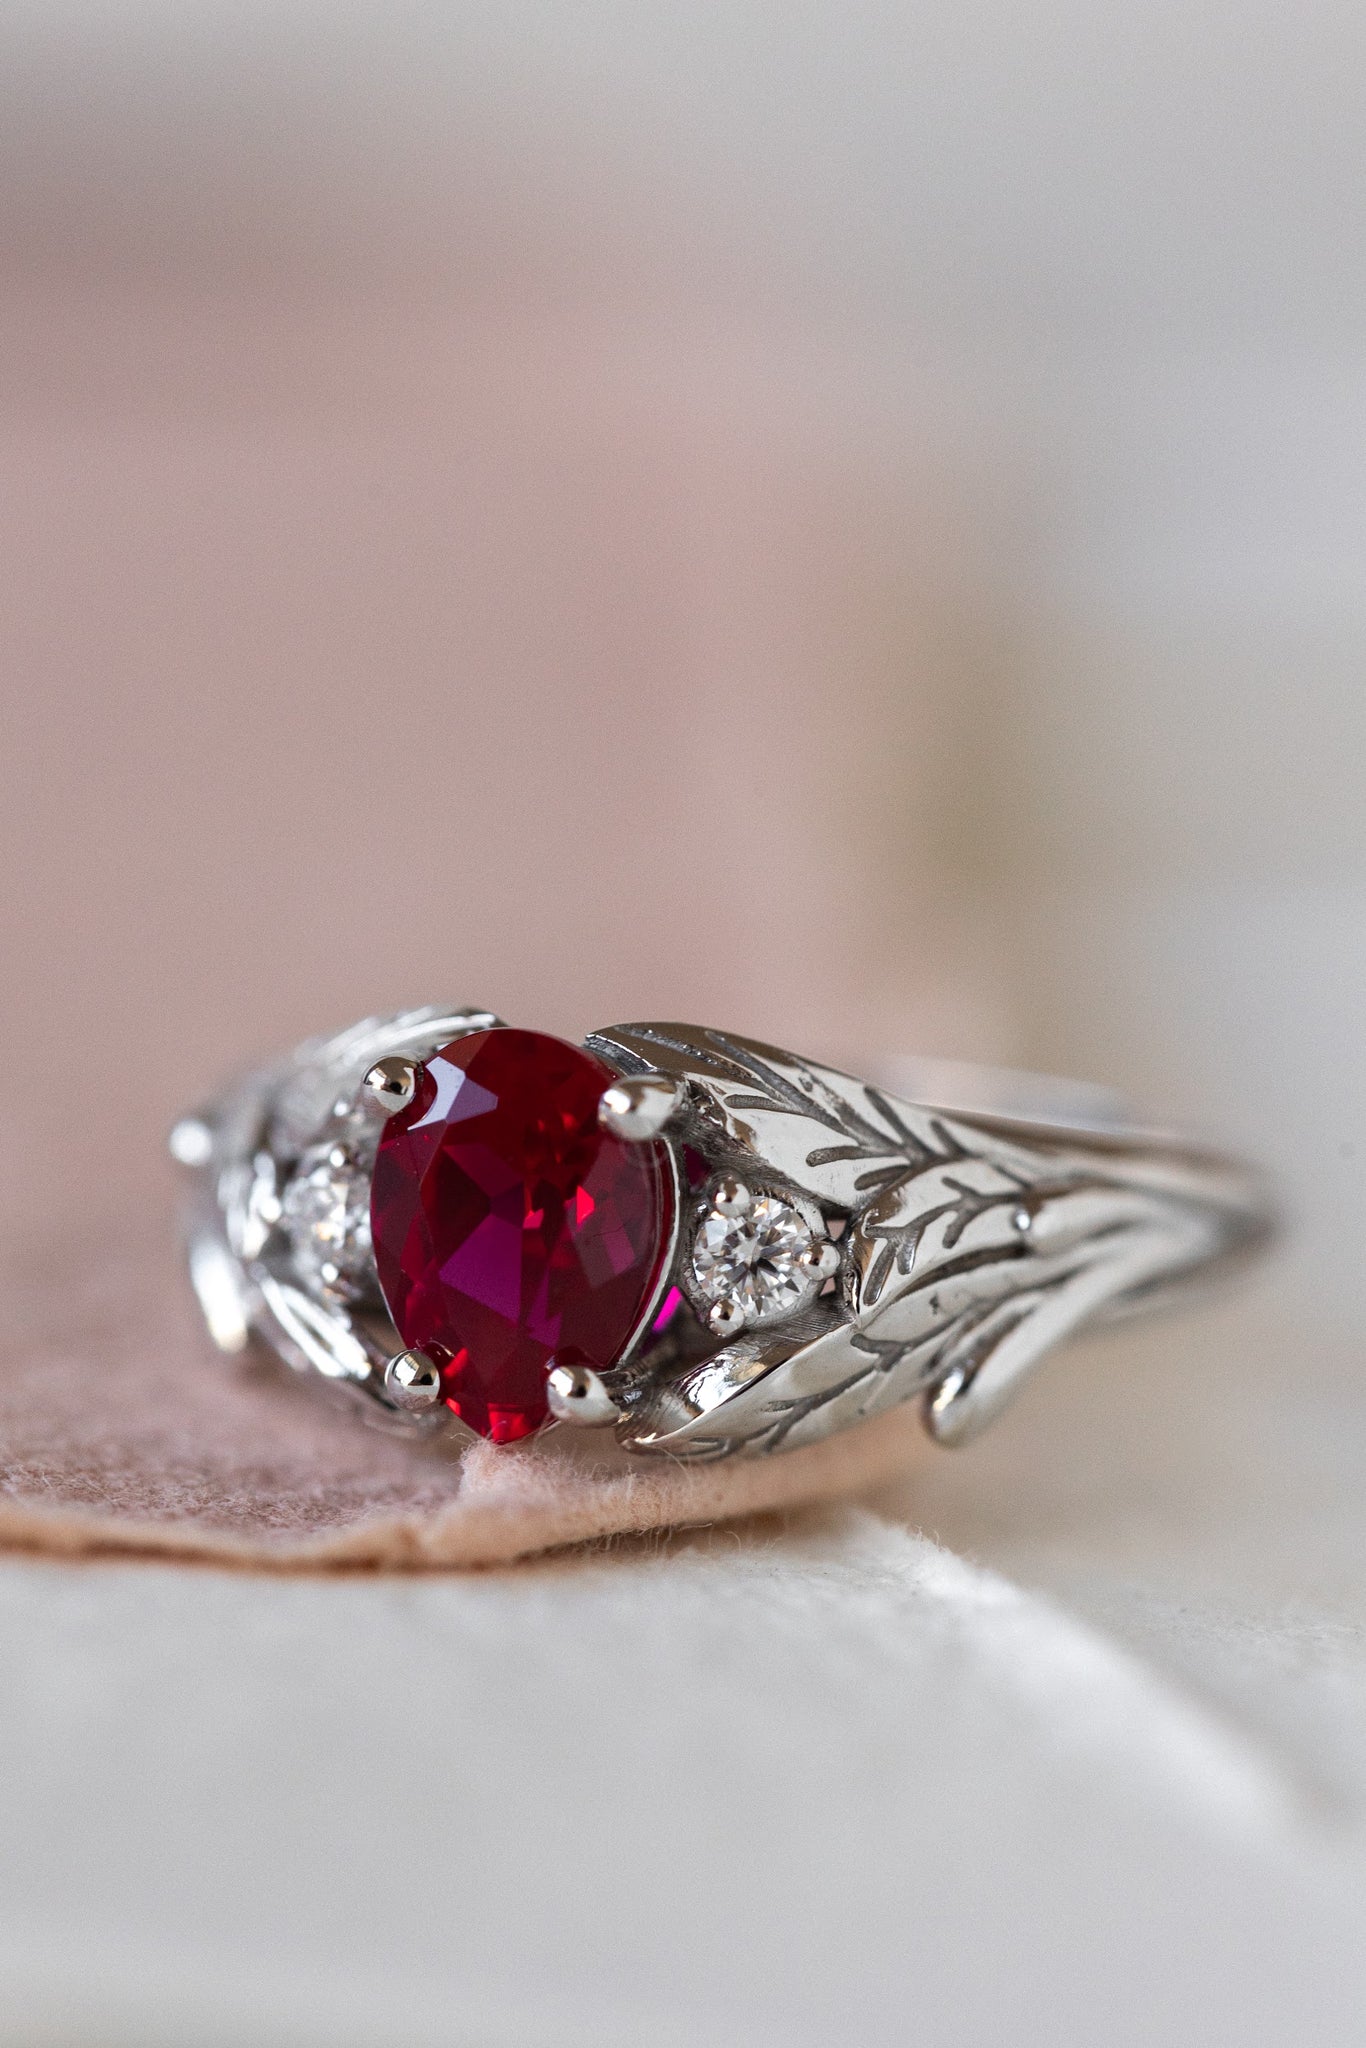 Lab ruby engagement ring, nature inspired ring with accent diamonds / Wisteria - Eden Garden Jewelry™